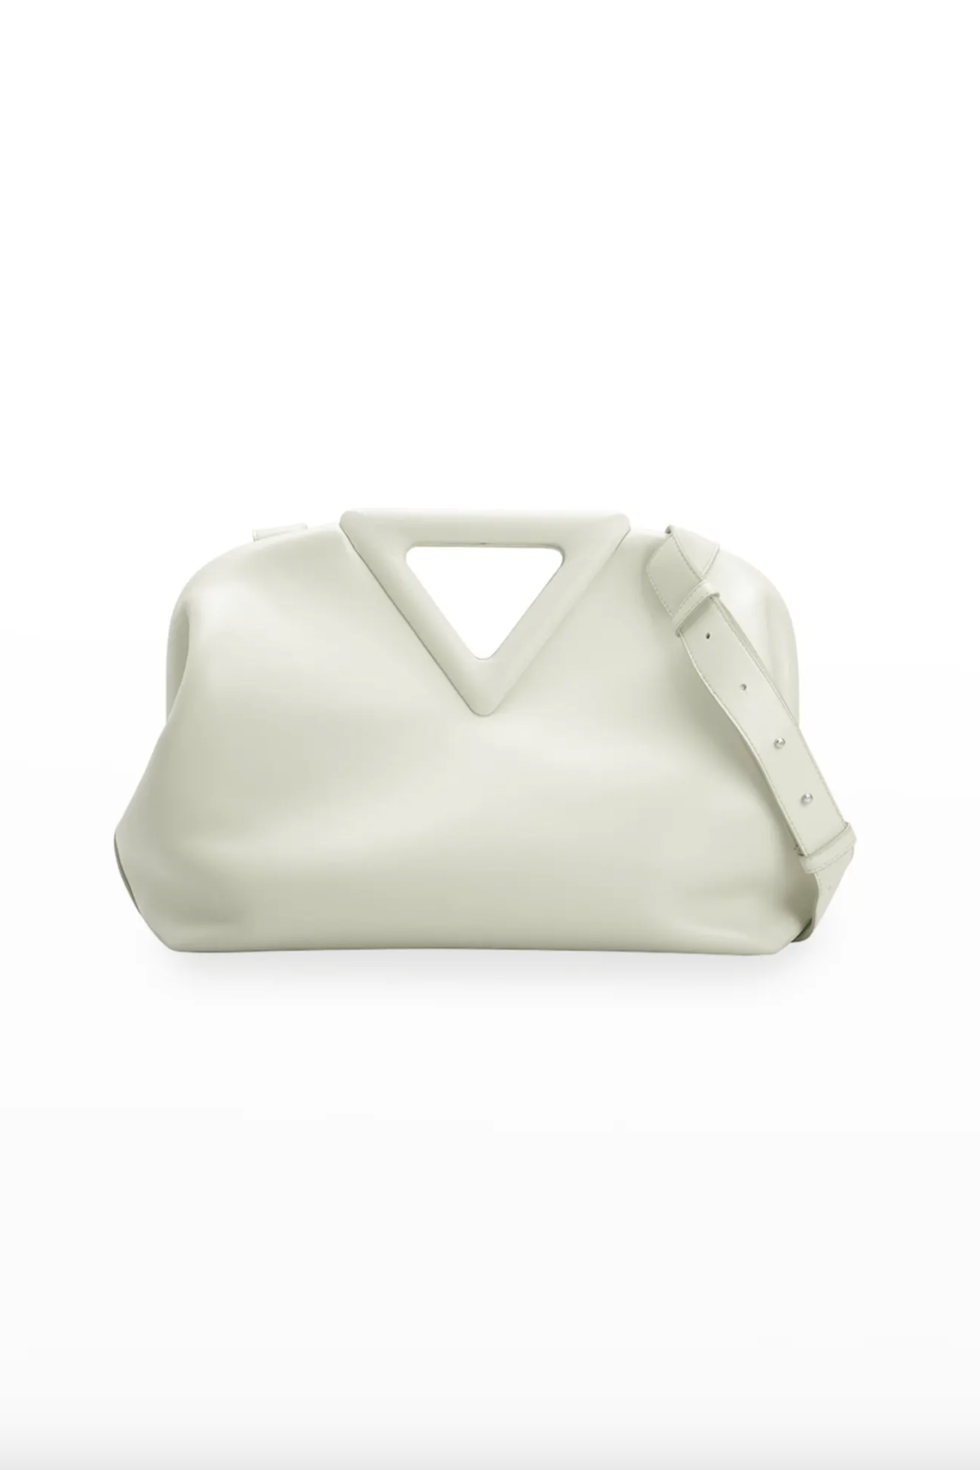 The Point Triangle Bag